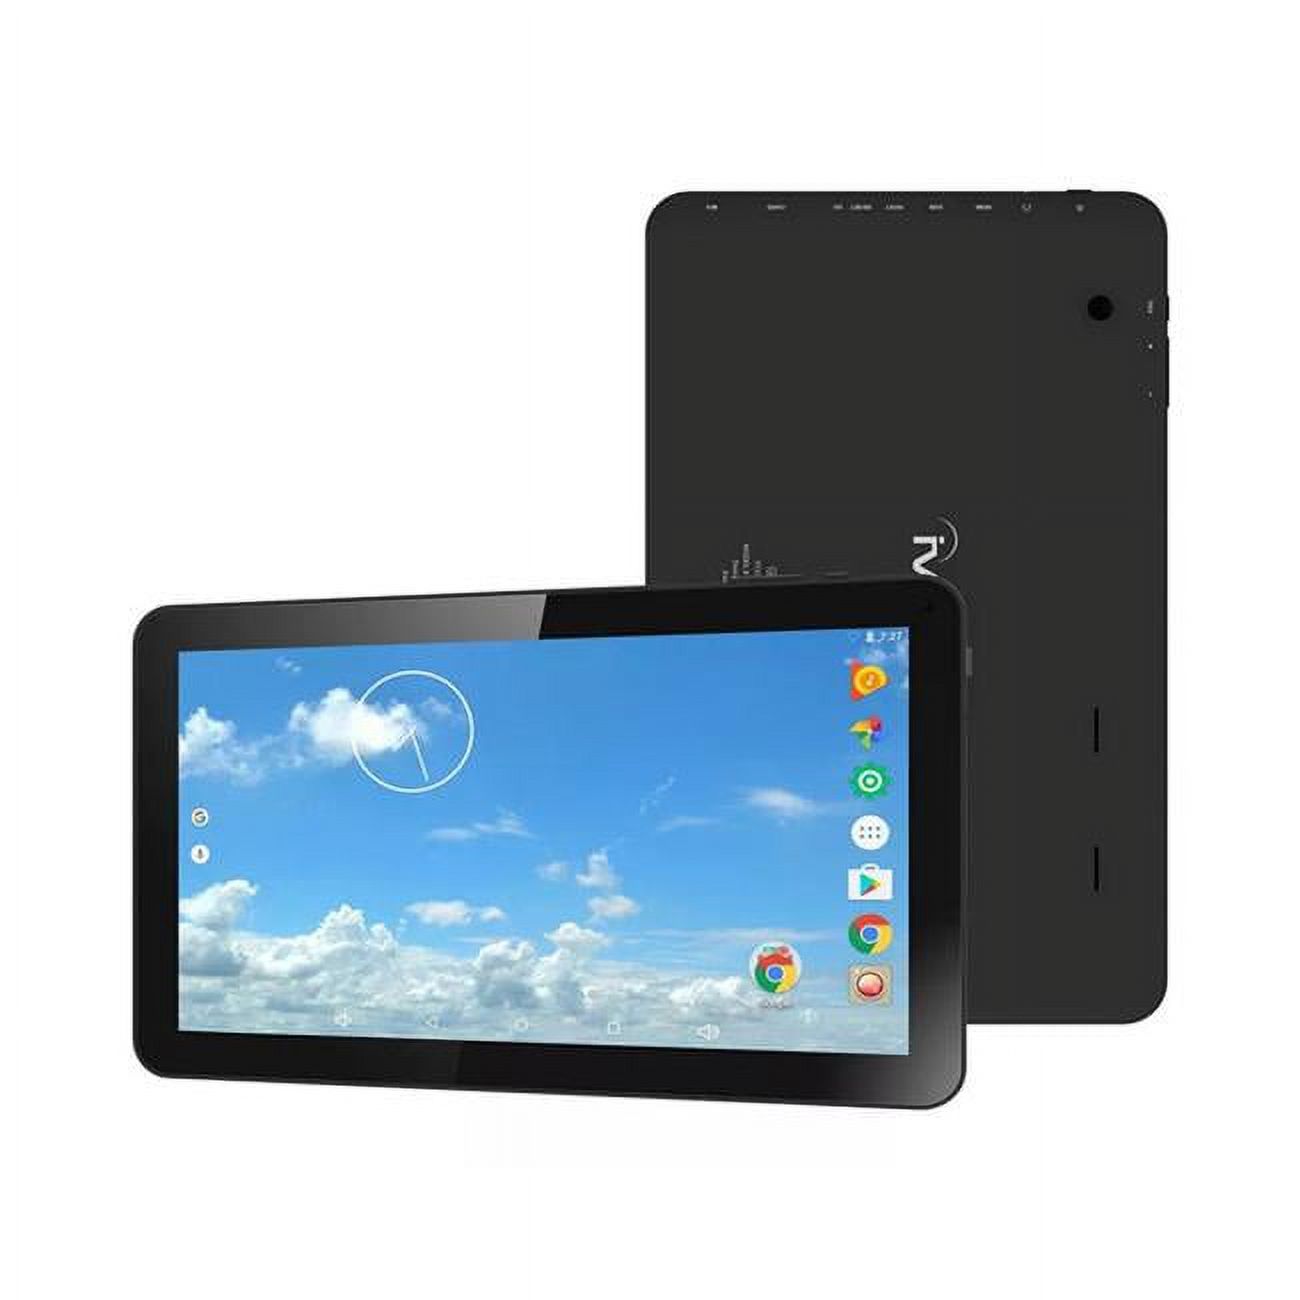 iView 1170TPC 10.1" Tablet - Cortex A53 Quad Core 1.2GHz Android Tablet - image 1 of 3